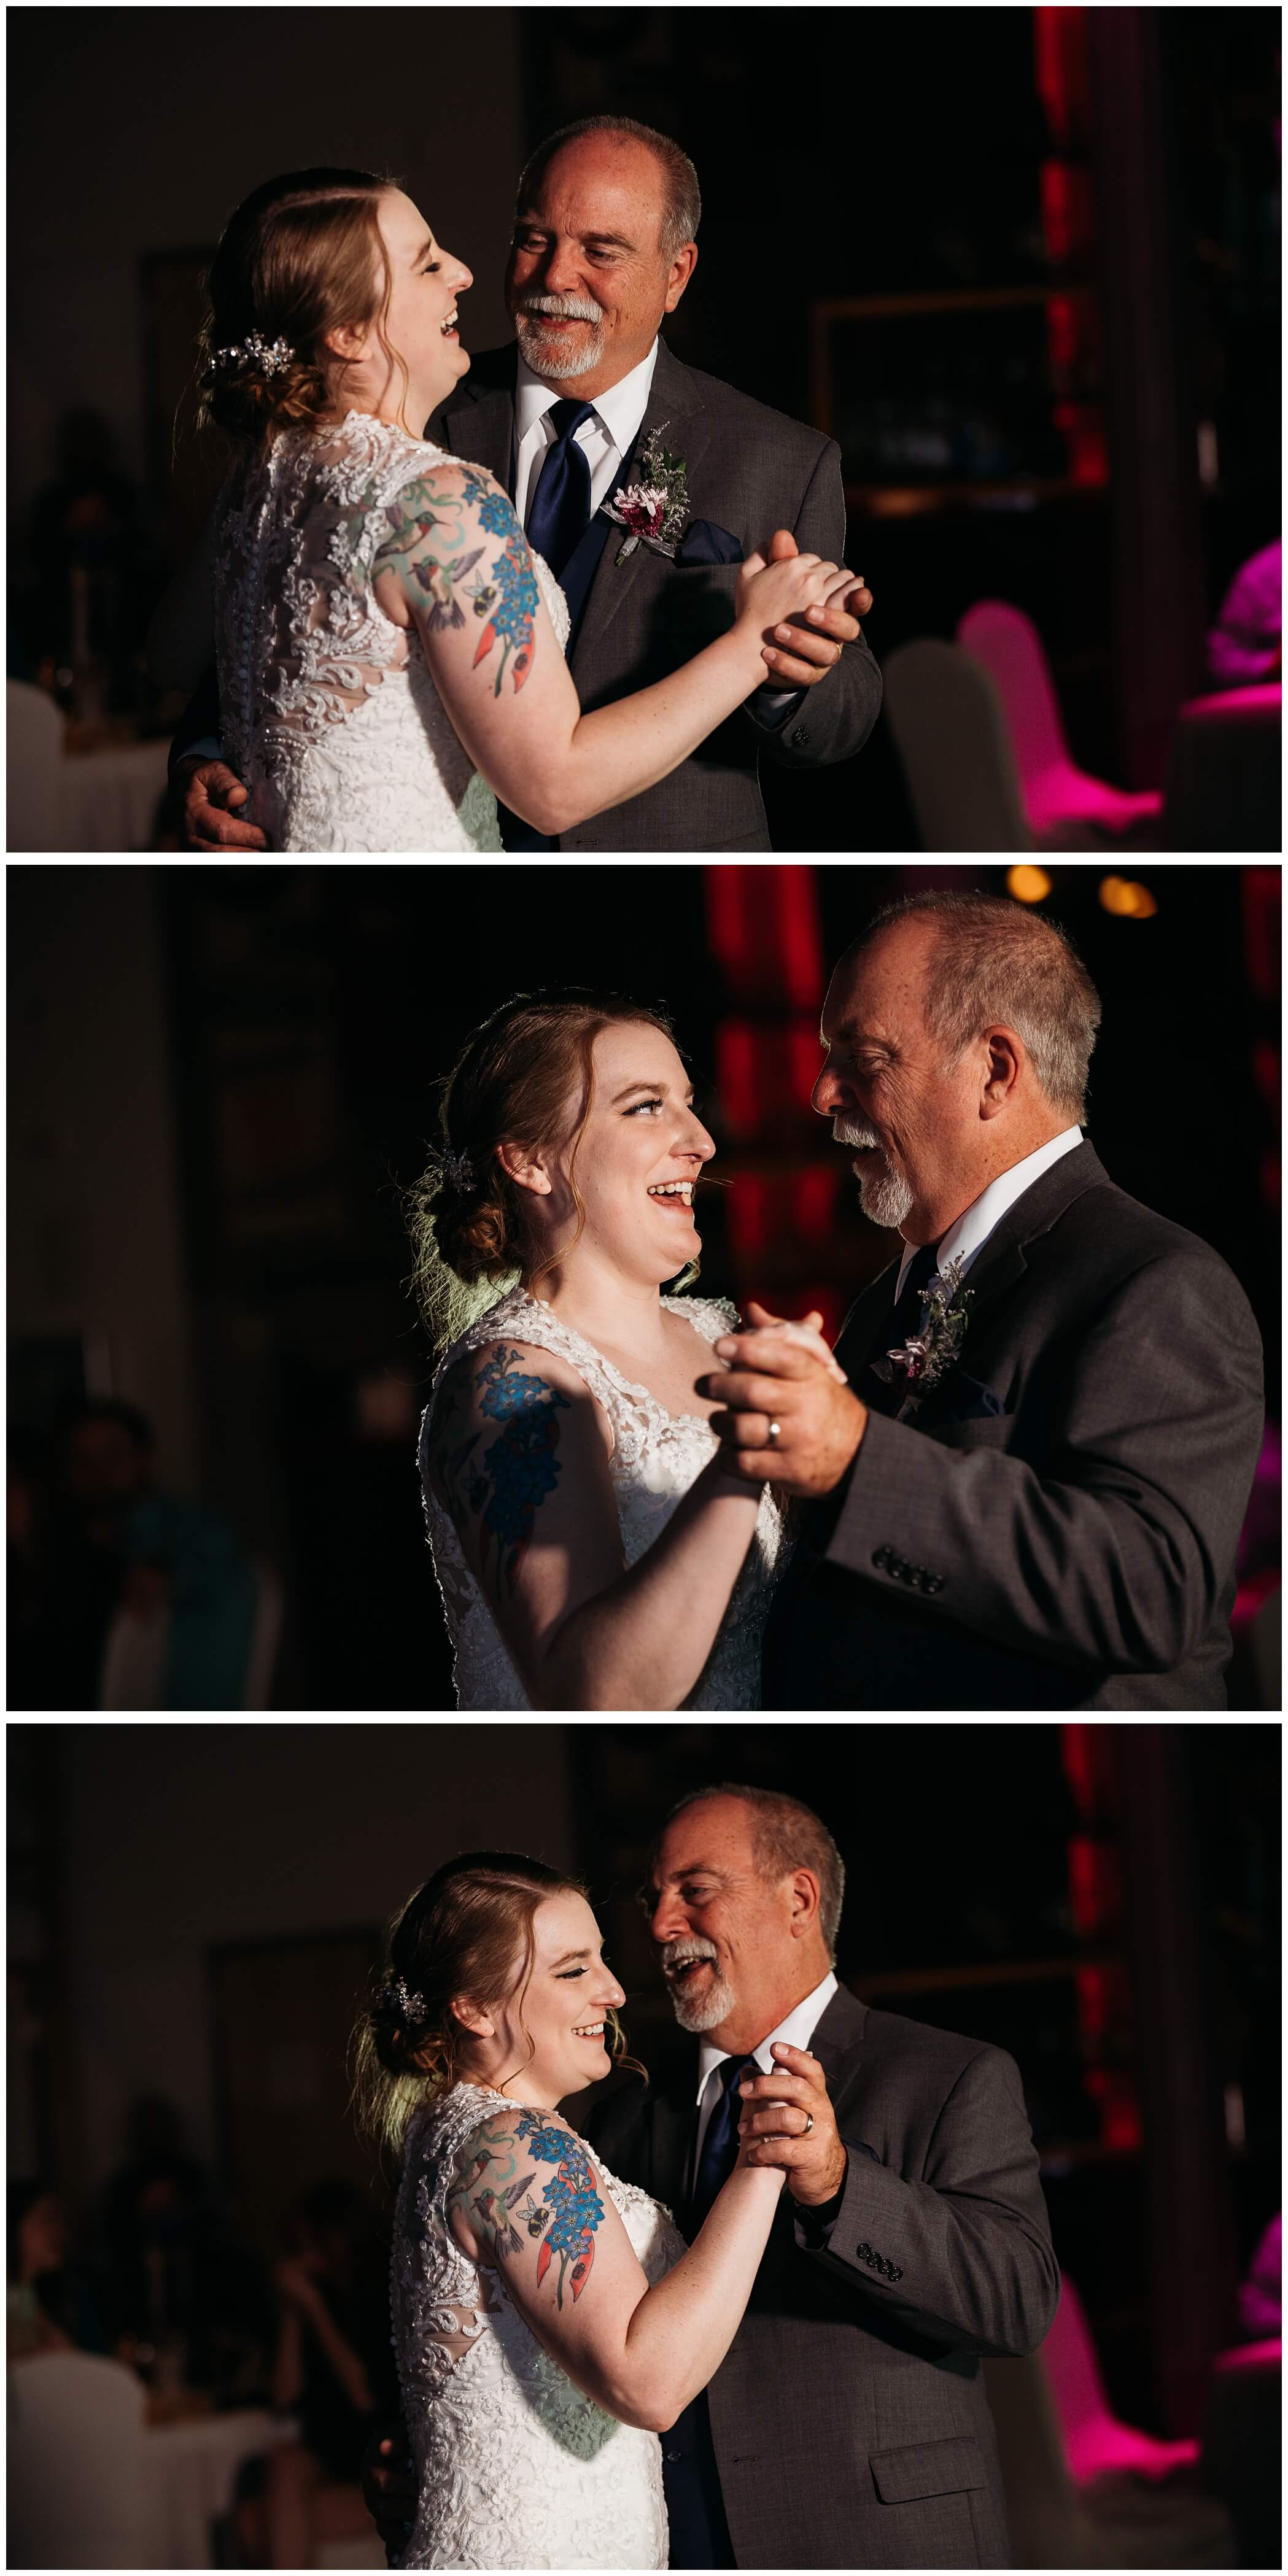 Father-Daughter dance during a wedding reception at Common Chord in Davenport.